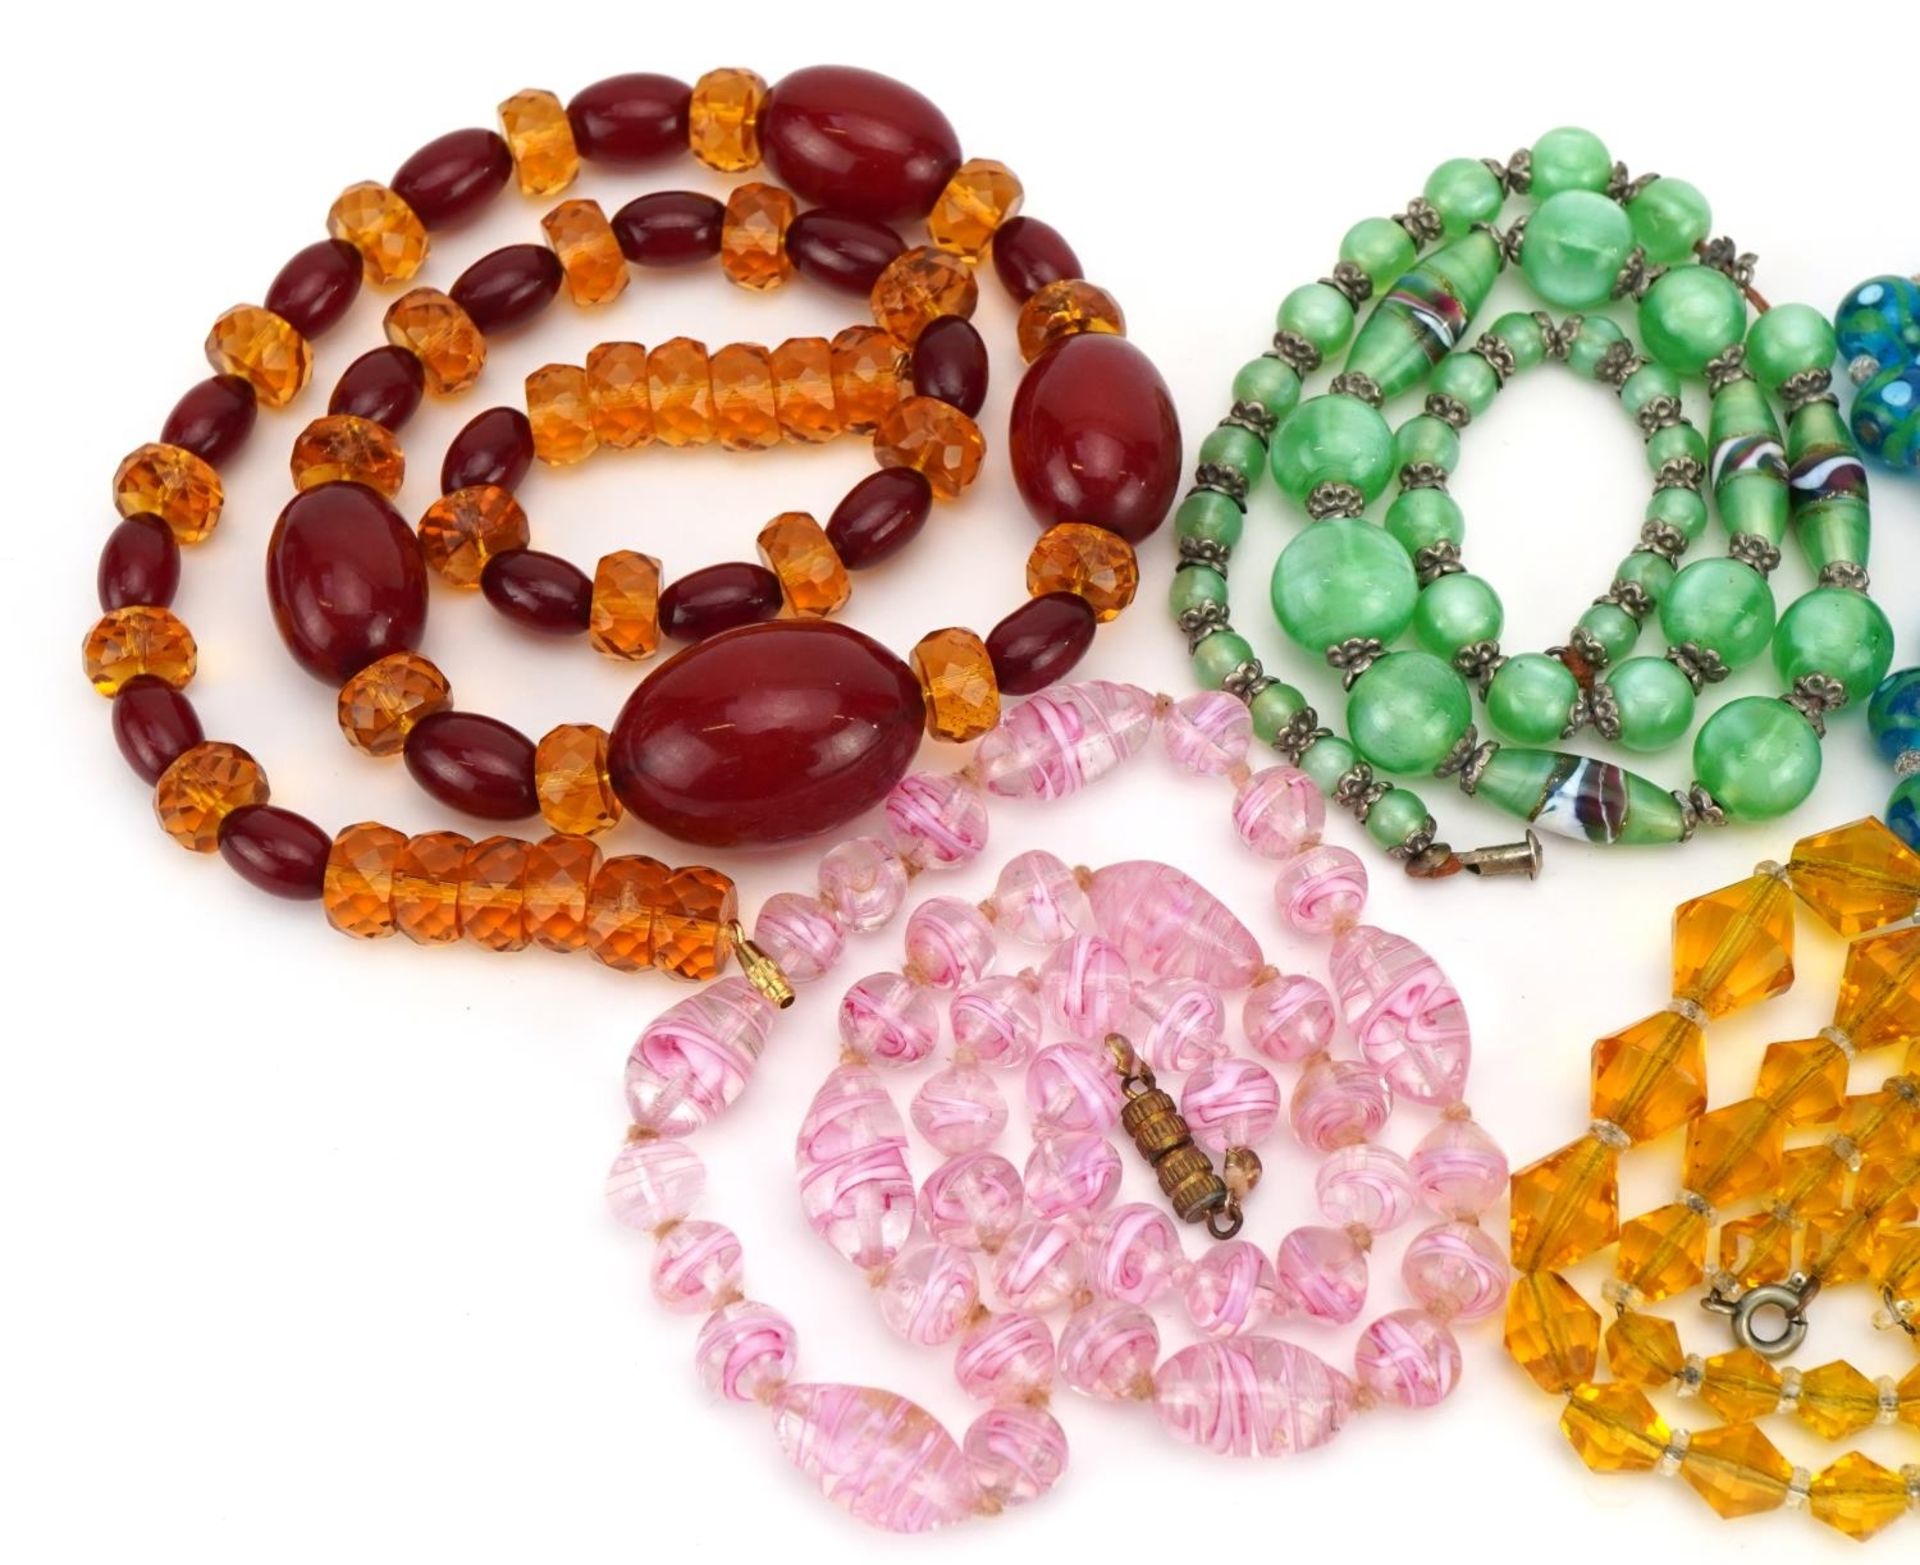 Five vintage necklaces including Venetian painted glass beads and cherry amber coloured beads - Image 2 of 3